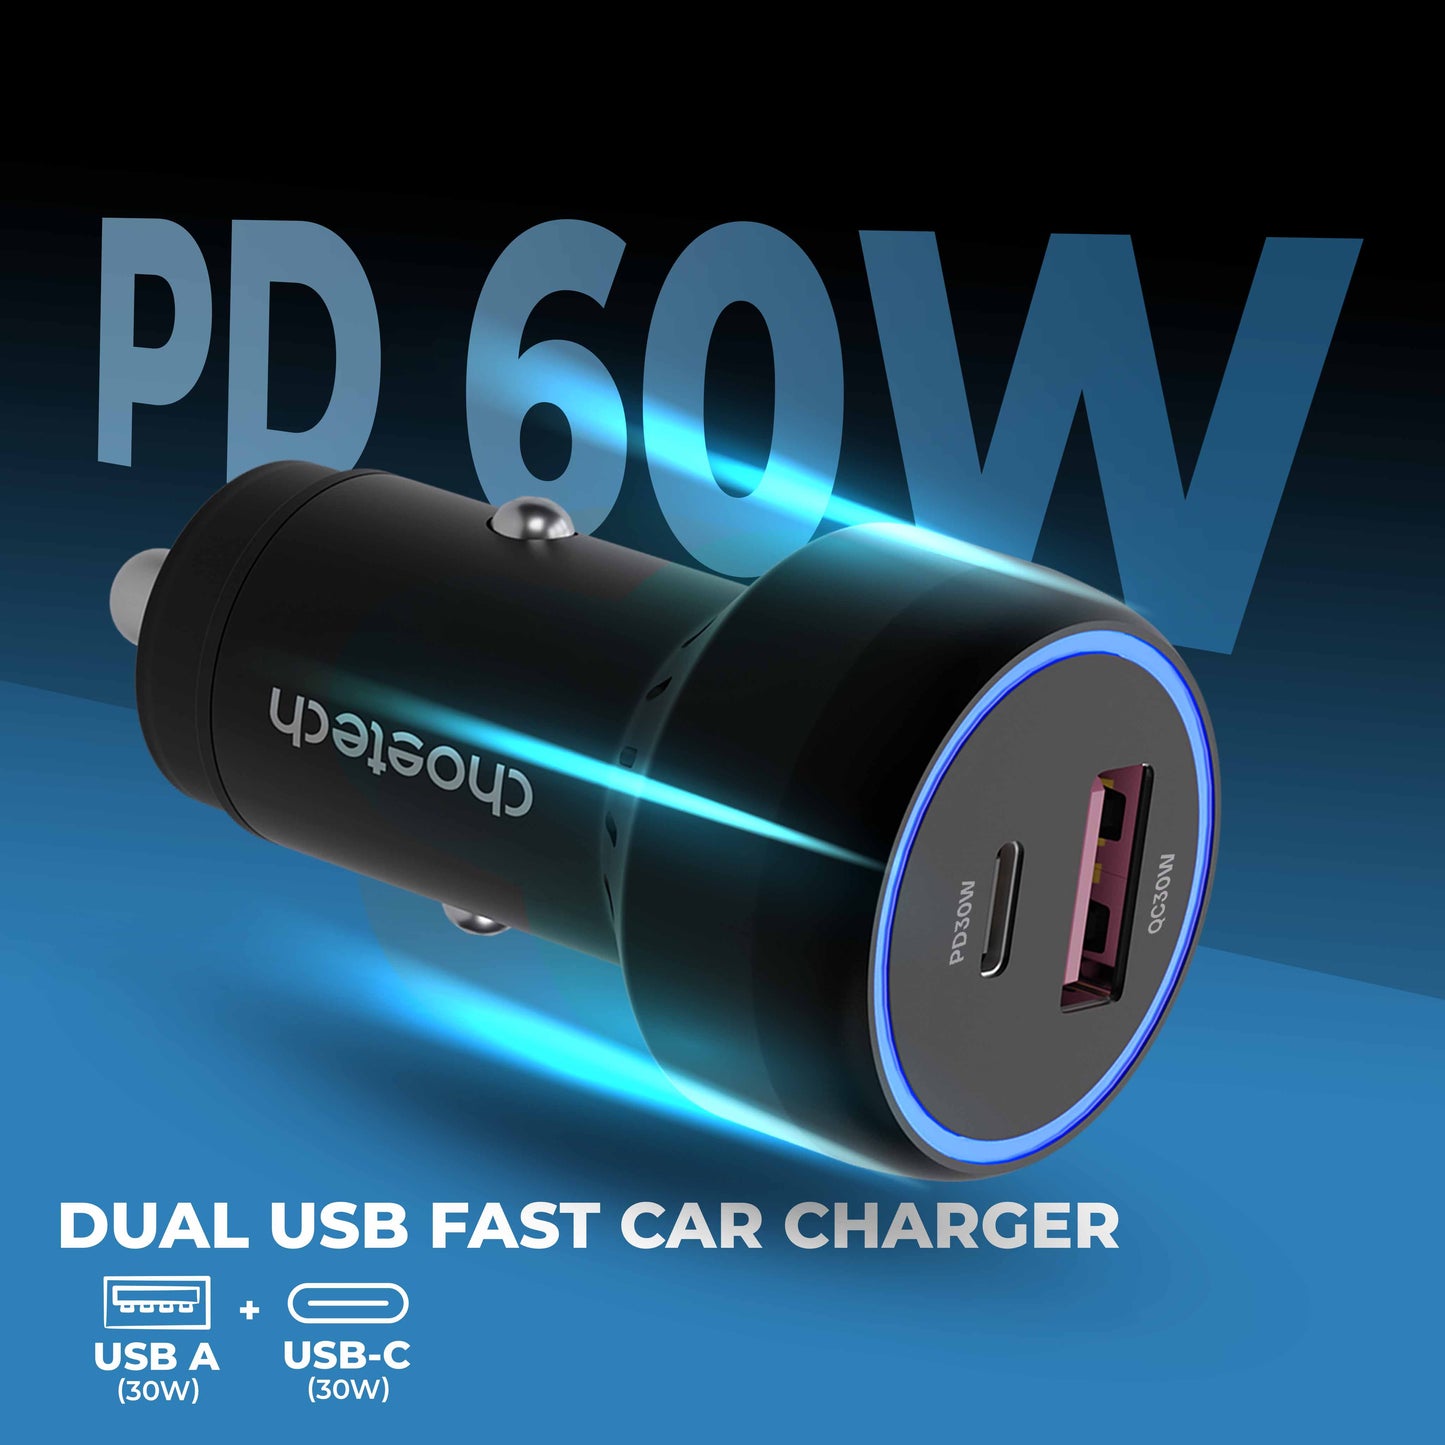 Choetech 60W USB Type-C/A Metal Body Mobile Car Charger, TC0014 | DUAL USB FAST CAR CHARGER | USB A  + USB-C |